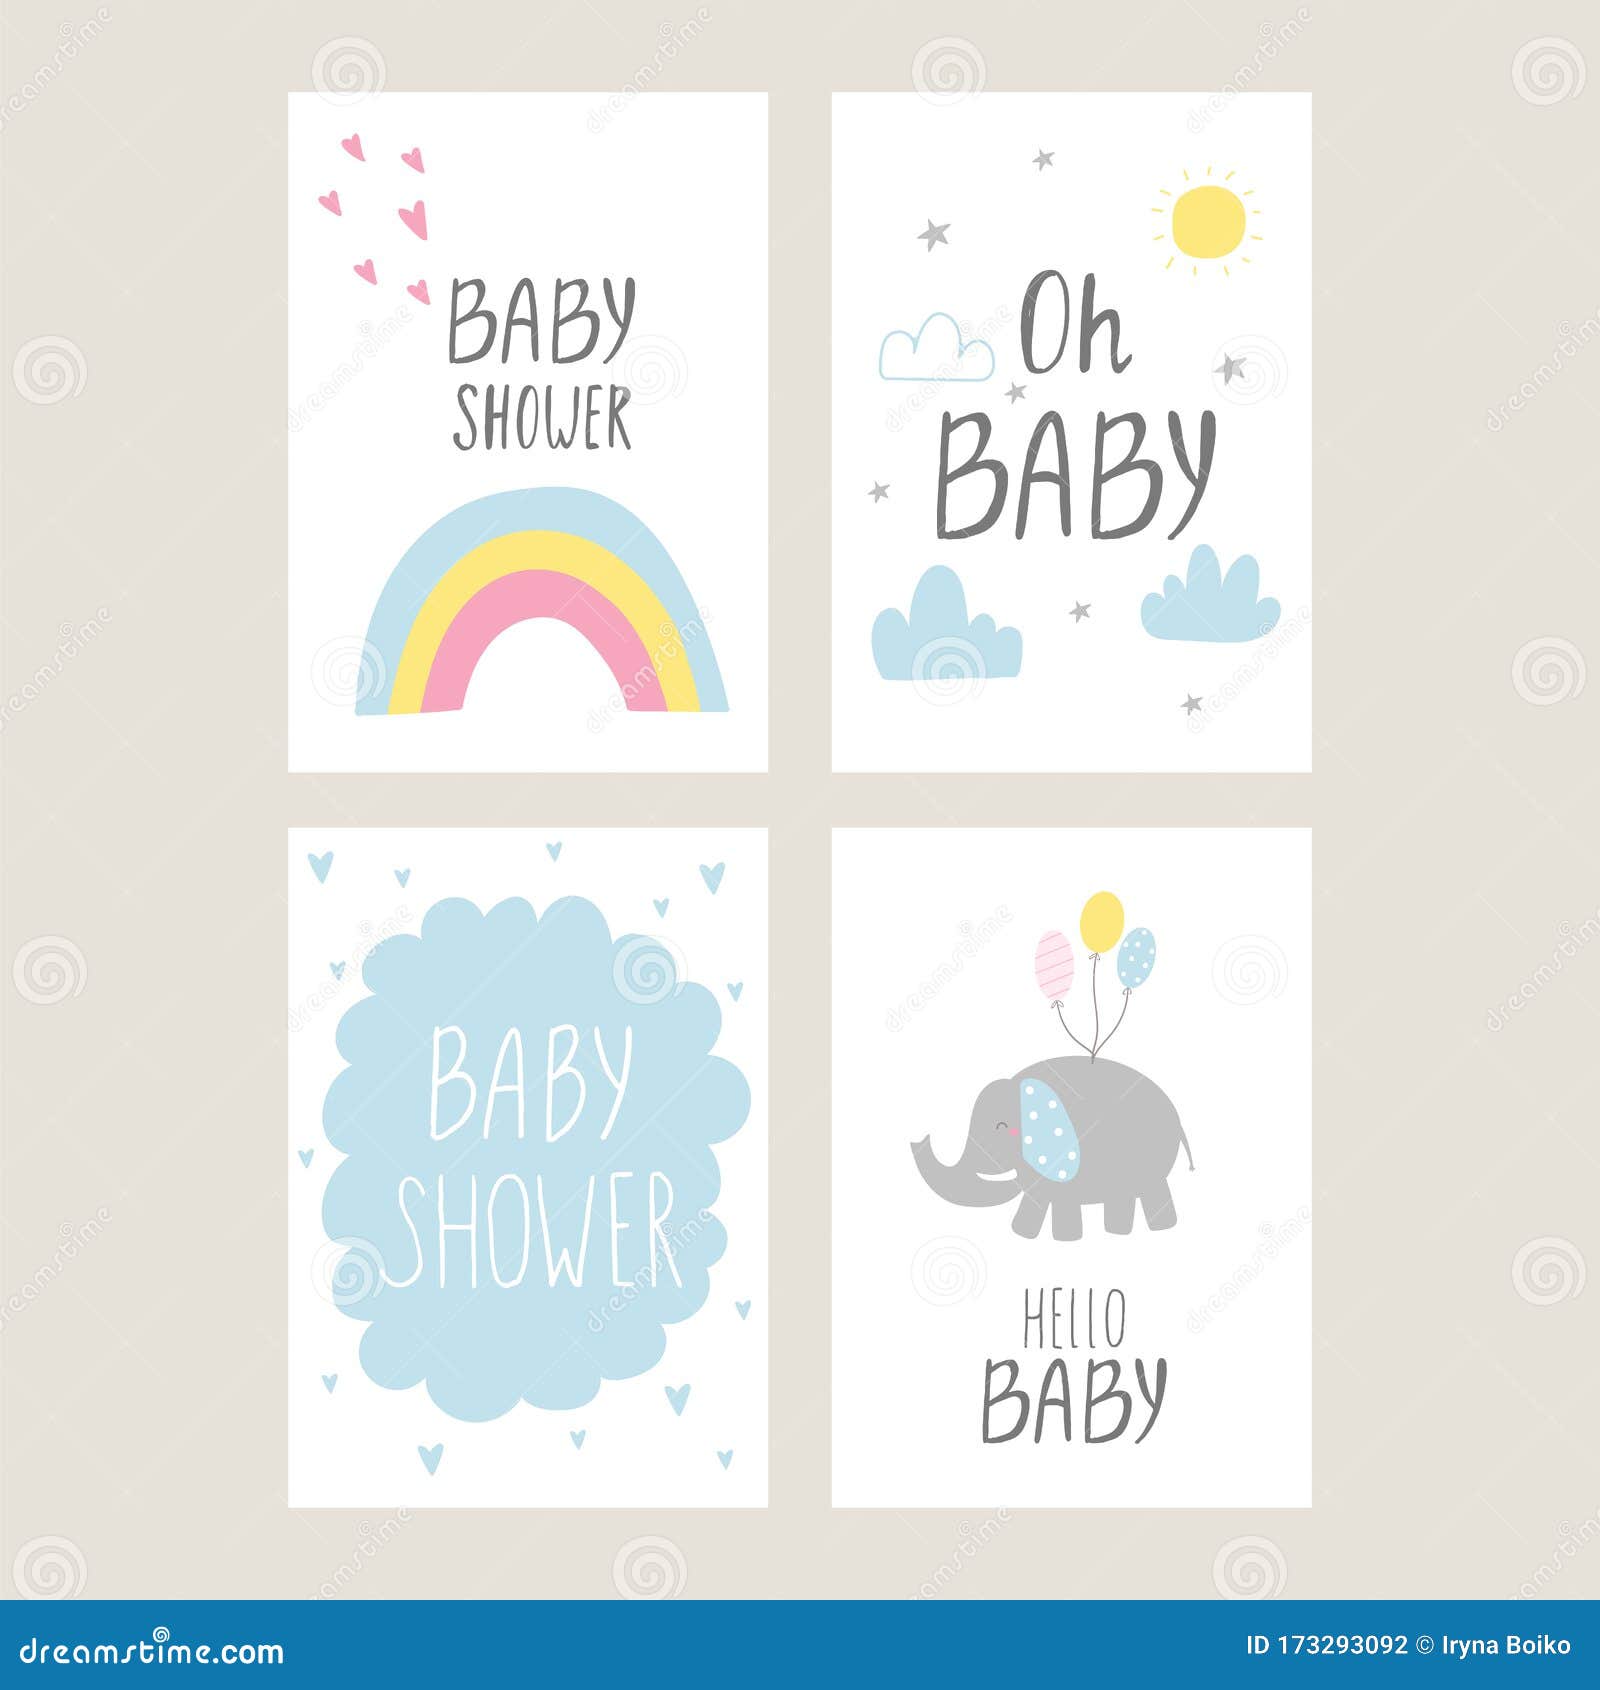 Baby Shower Card To Print Free / Free Vector Baby Shower Card Template